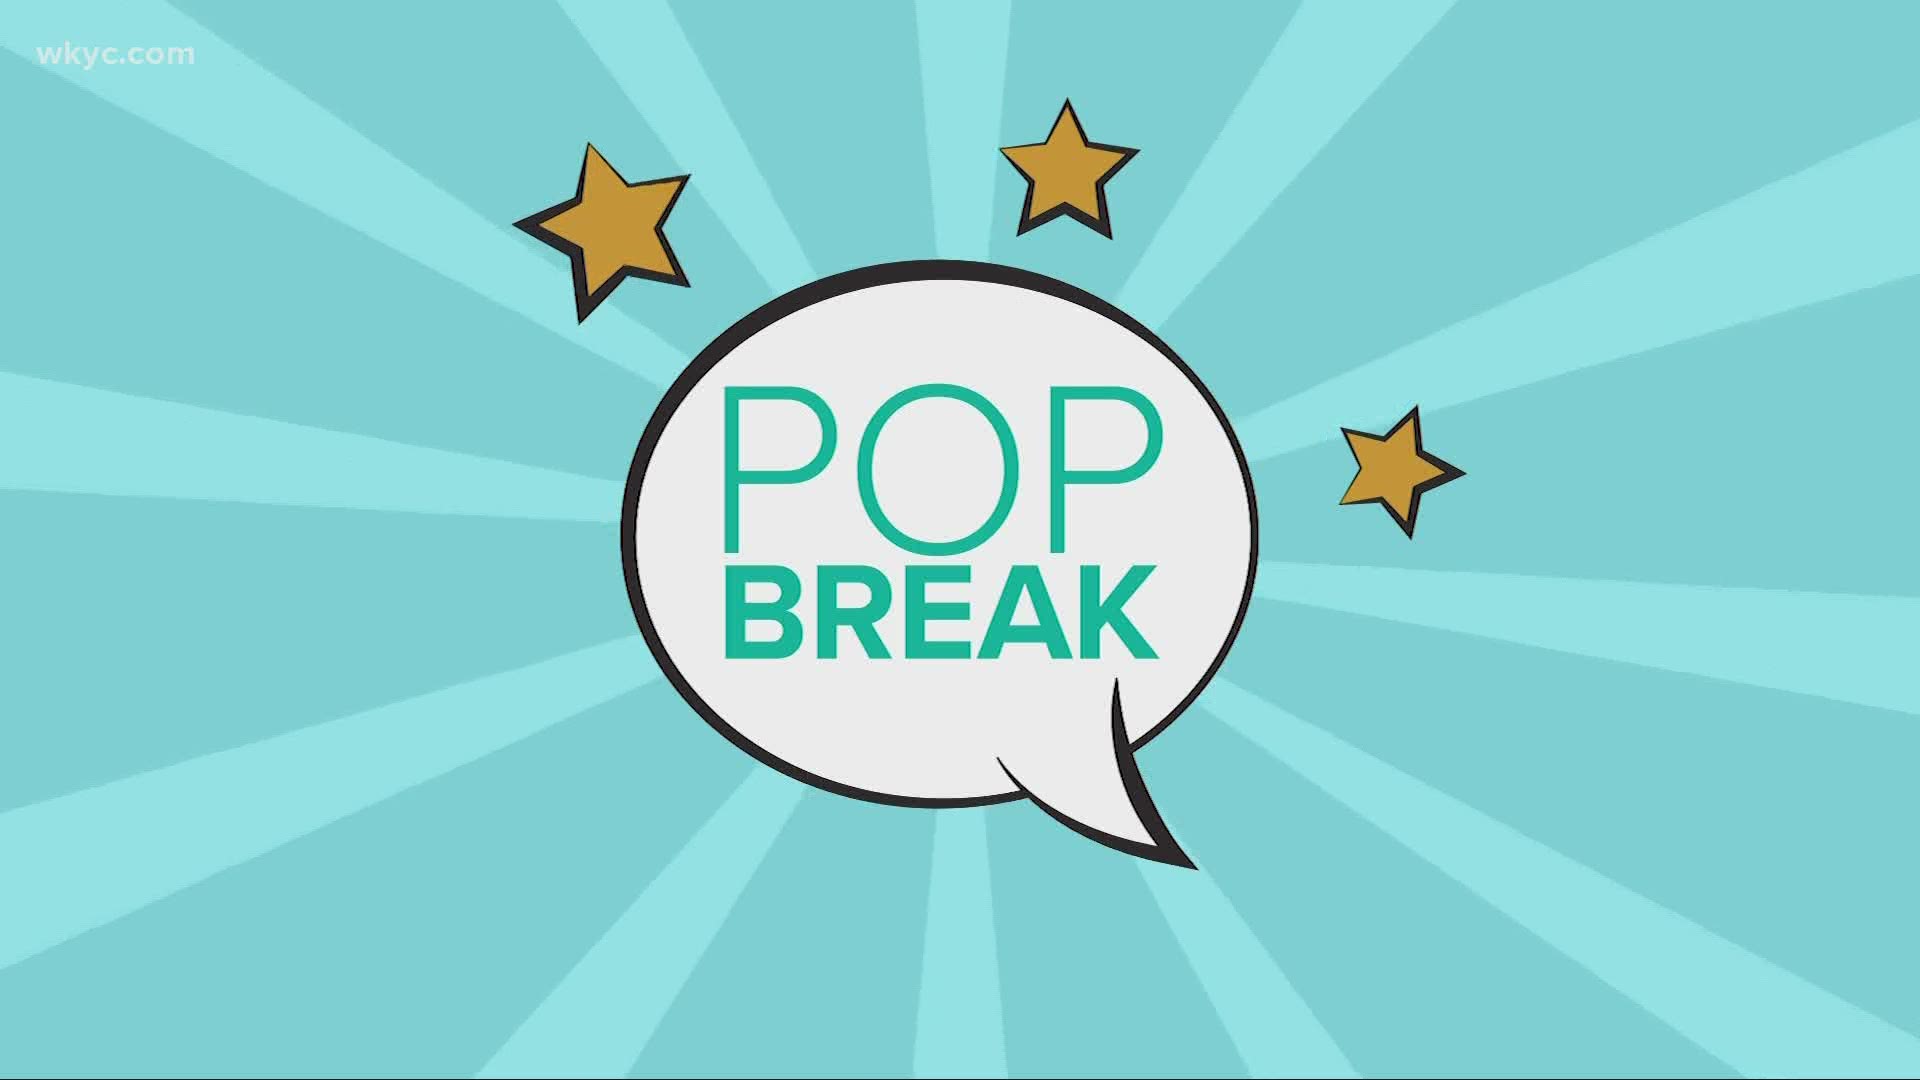 It's time for your daily break from traditonal news coverage. 3News' Stephanie Haney has today's top entertainment headlines in Pop Break.